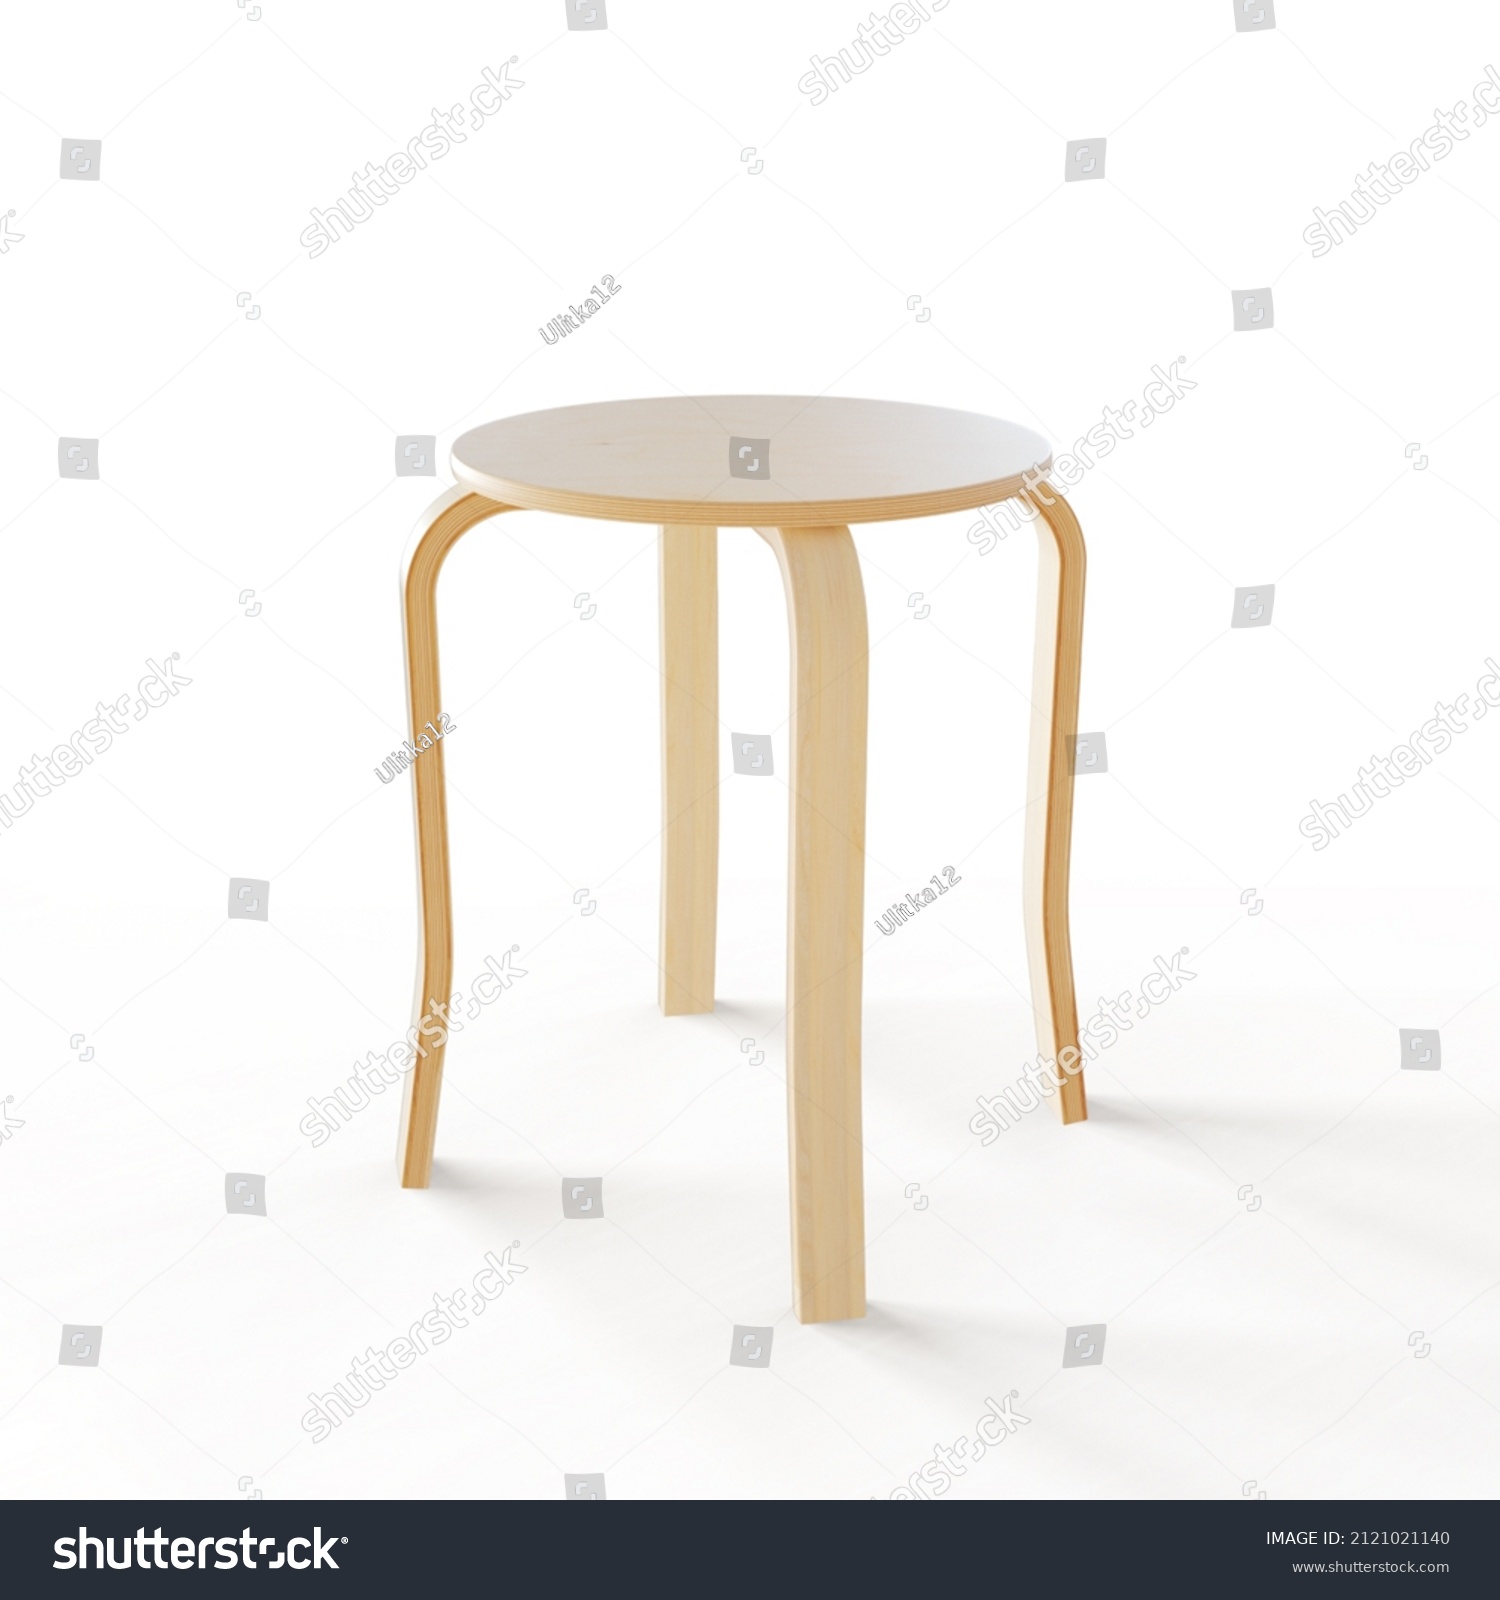 Wooden chair made of plywood on a white isolated background. #2121021140